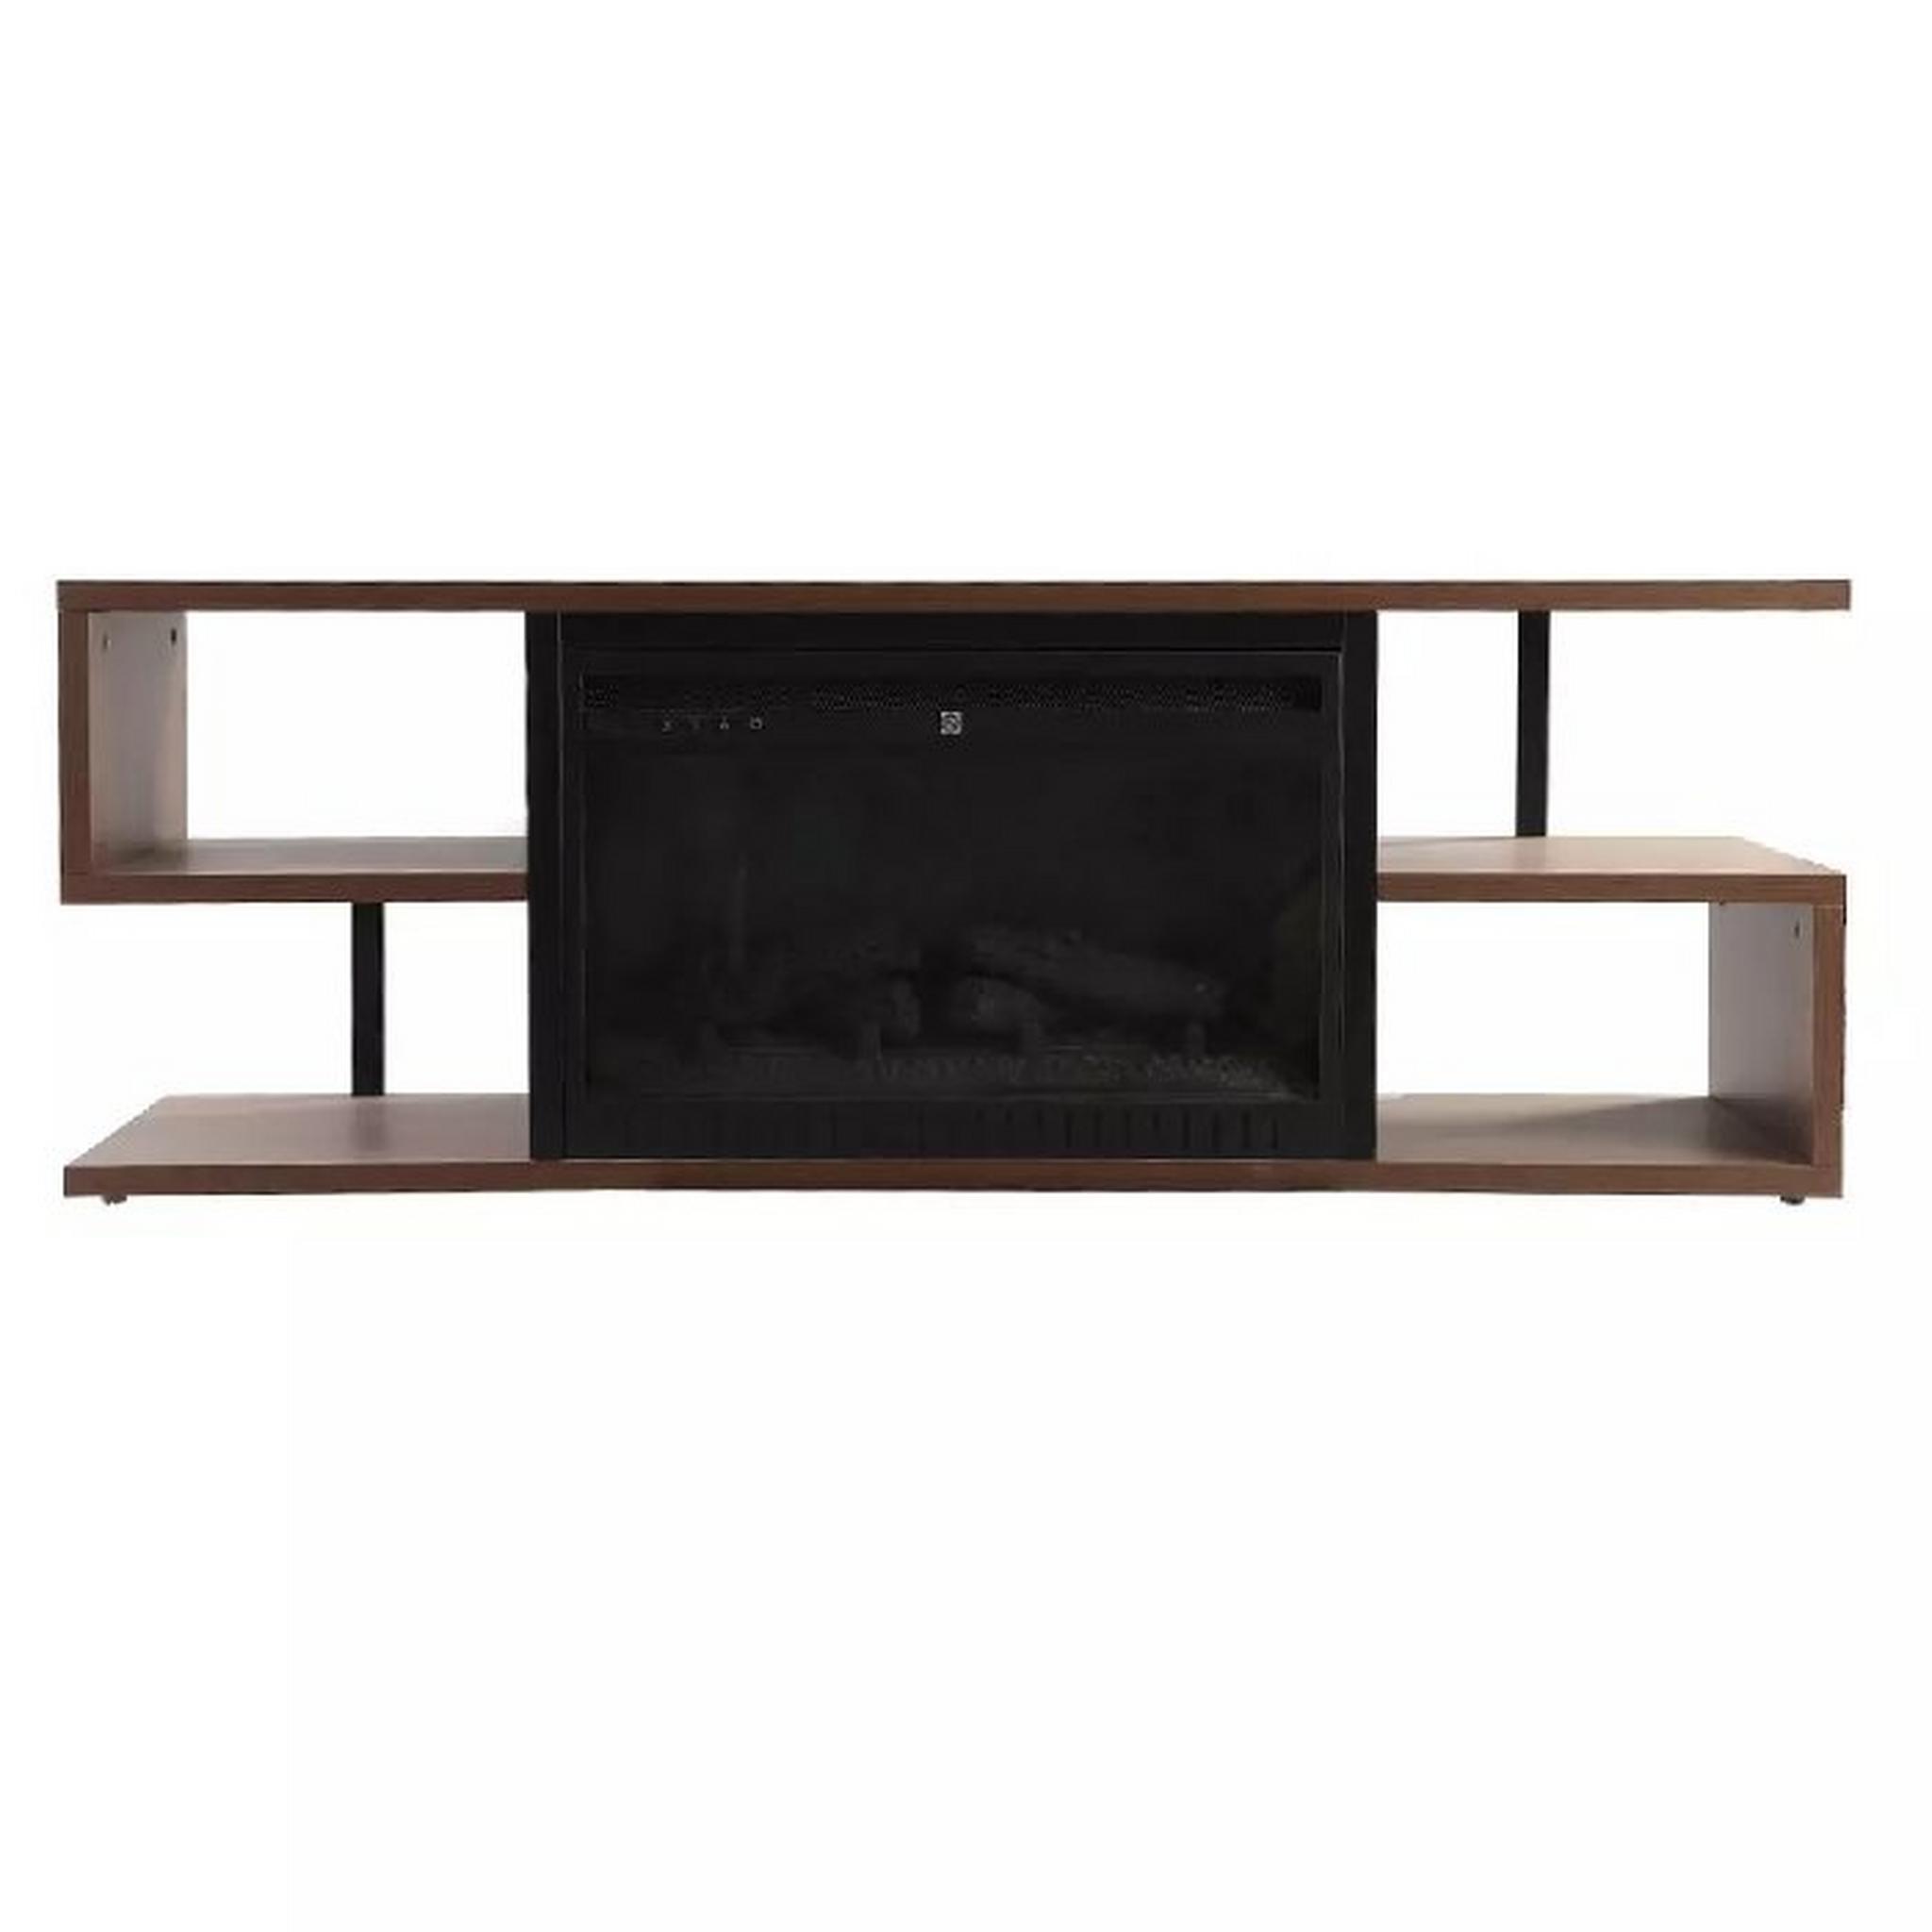 Wansa Upto 55-inch TV Stand with Fireplace Insert (A510-8) + Fireplace insert for TV Stand (SF122-26A)